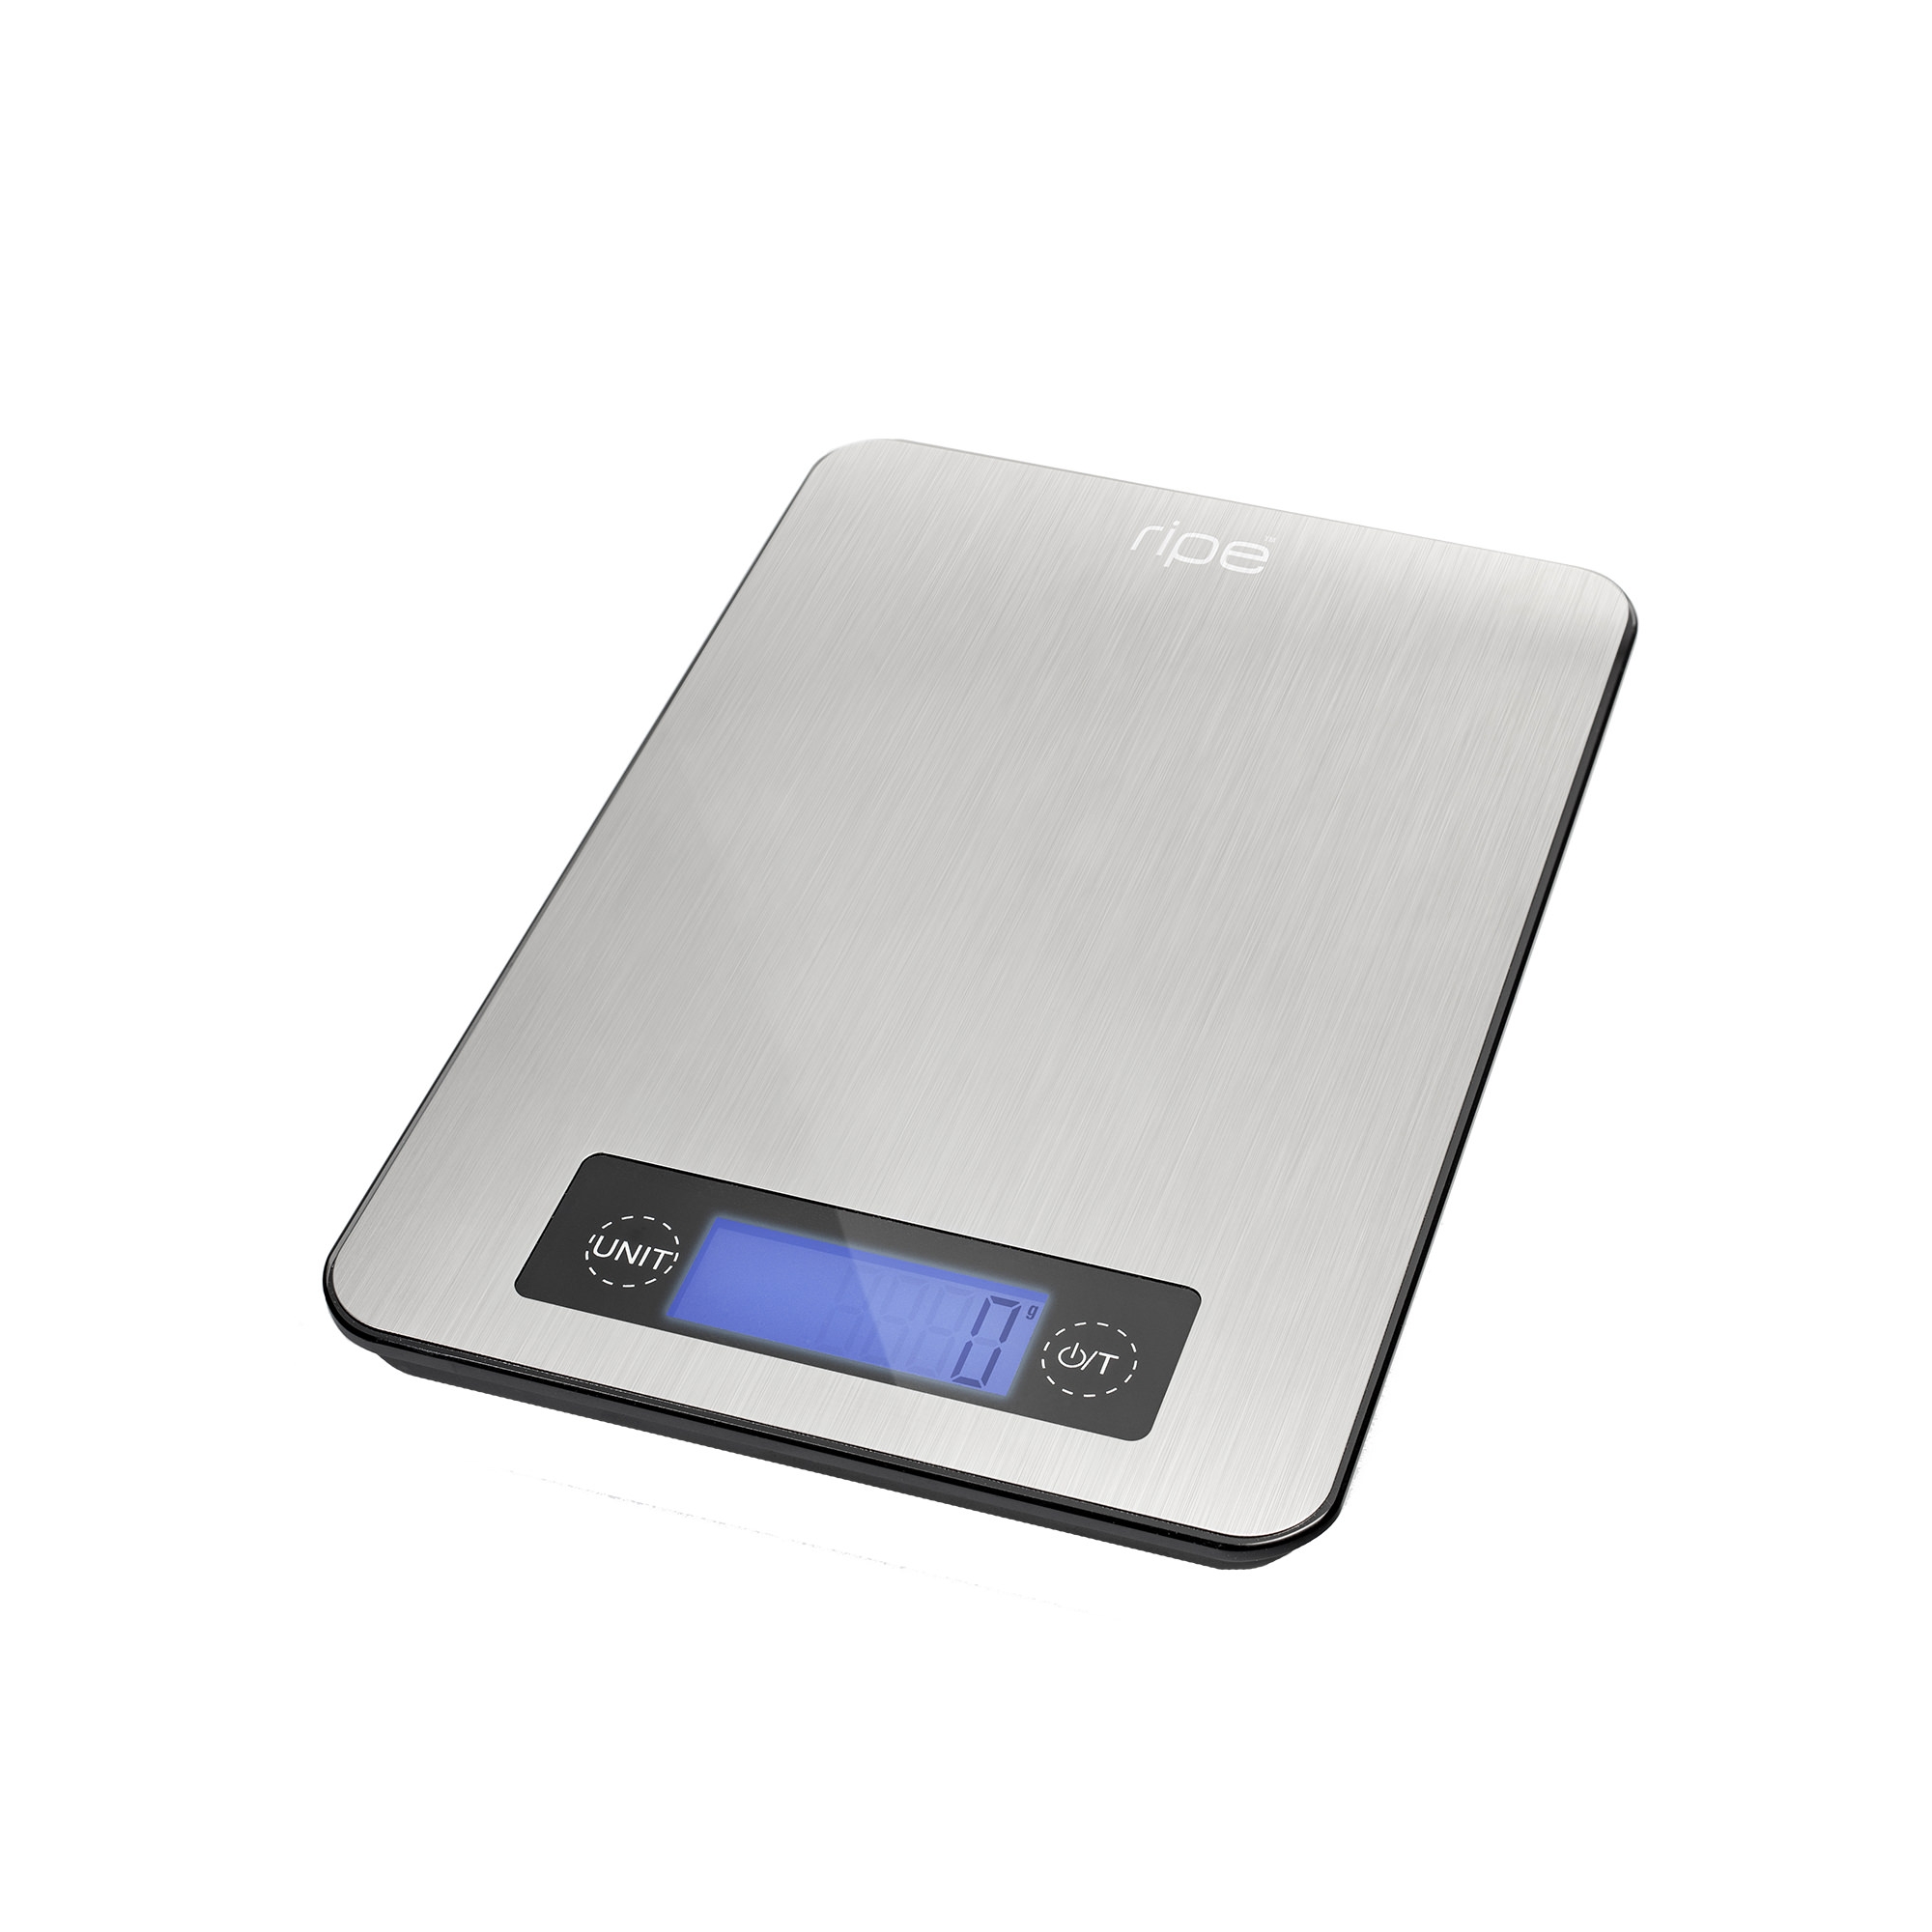 Ripe Digital Kitchen Scale 10kg Stainless Steel Image 1